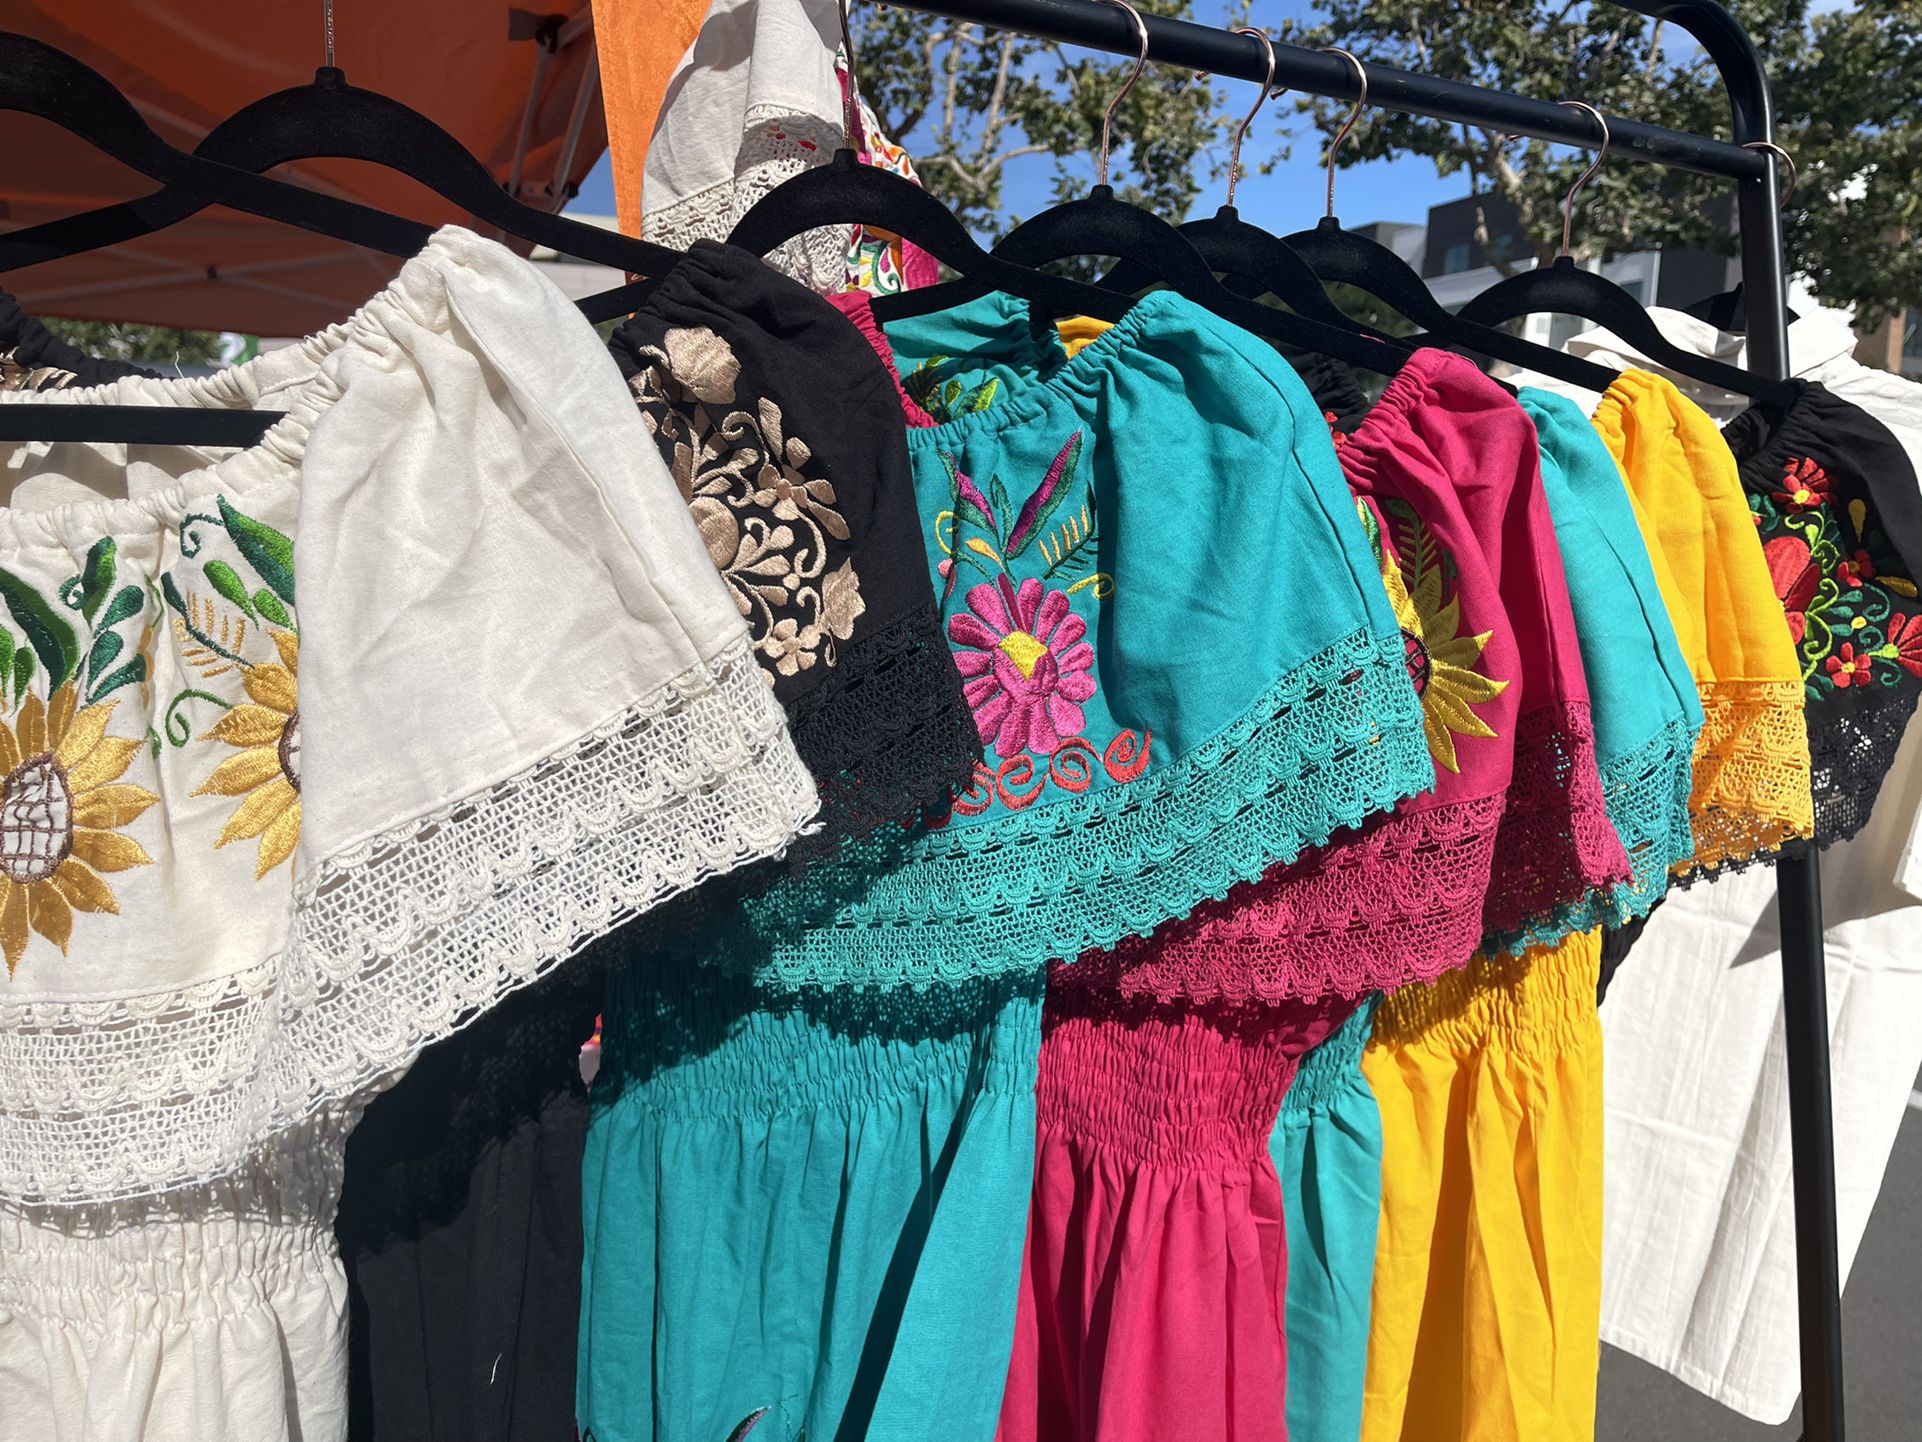 Embroidered Mexican Shirts And Dresses / Blusas Mexicanas Bordadas Sizes Small To 3X JUST IN!! GUAYABERAS!!